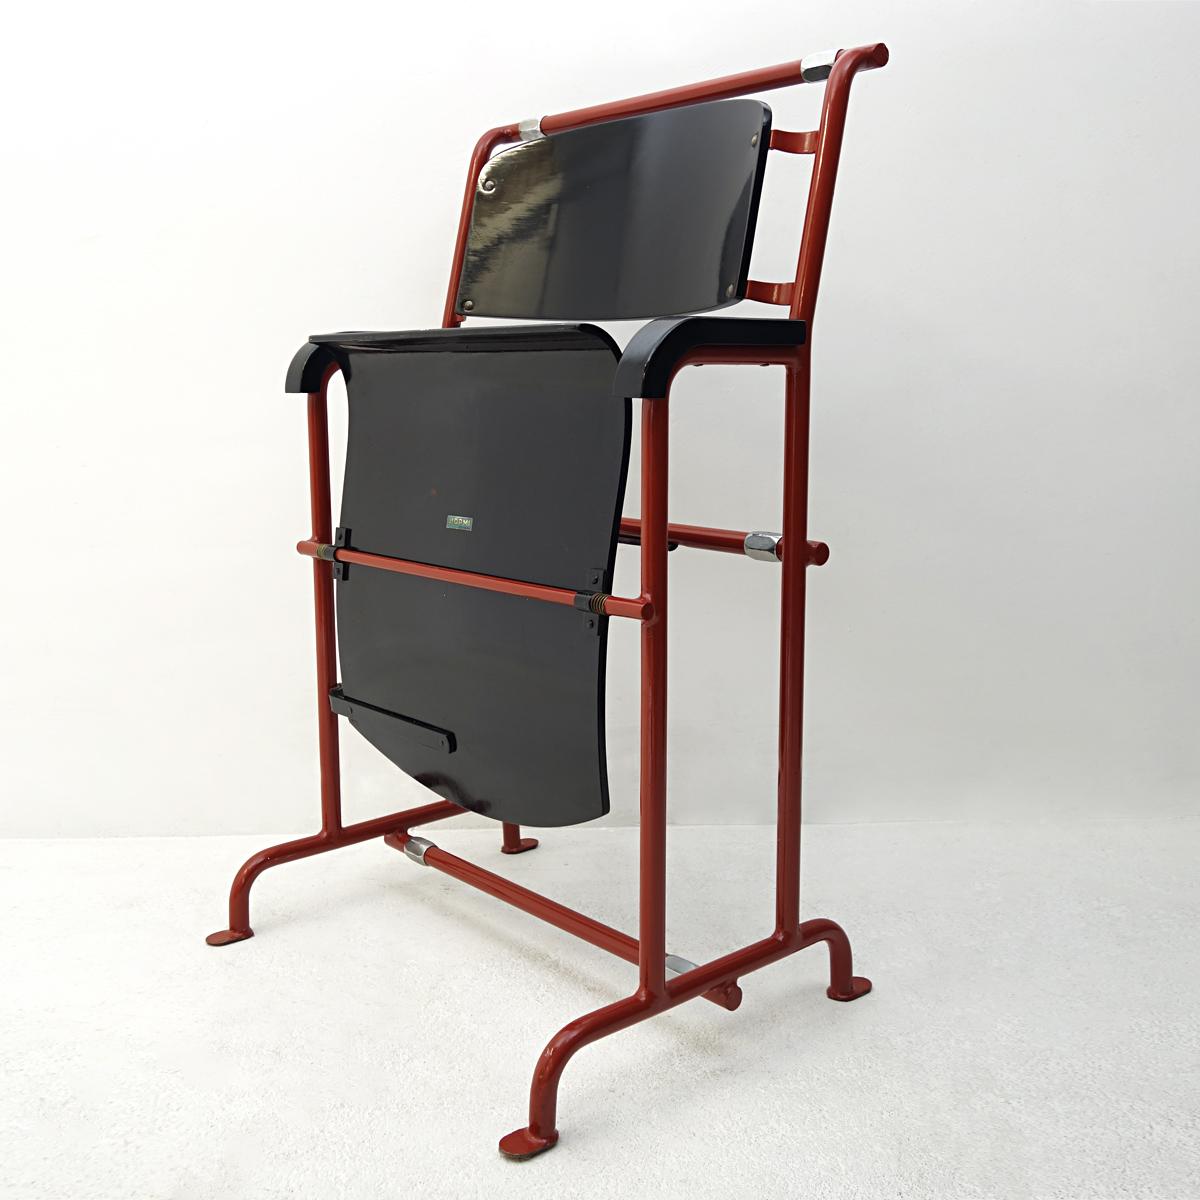 Modernist Folding Chair by Gerrit Rietveld for Hopmi in Red Metal and Black Wood 1